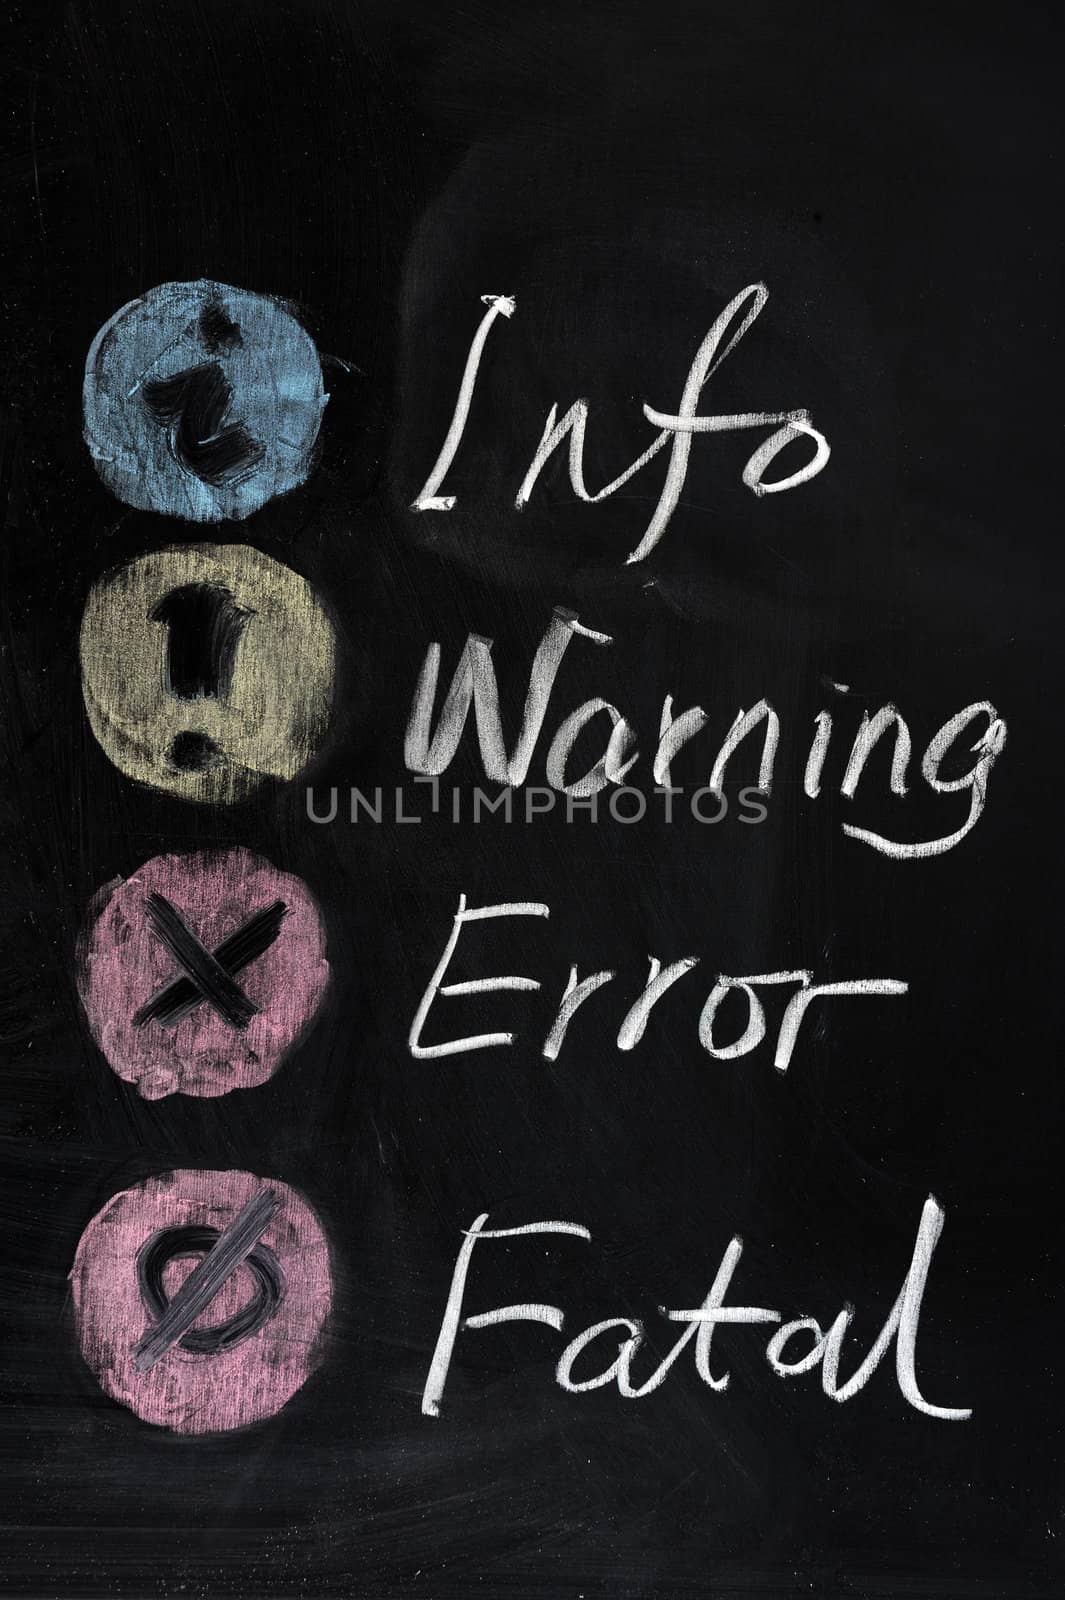 Info, warning, error and fatal by raywoo